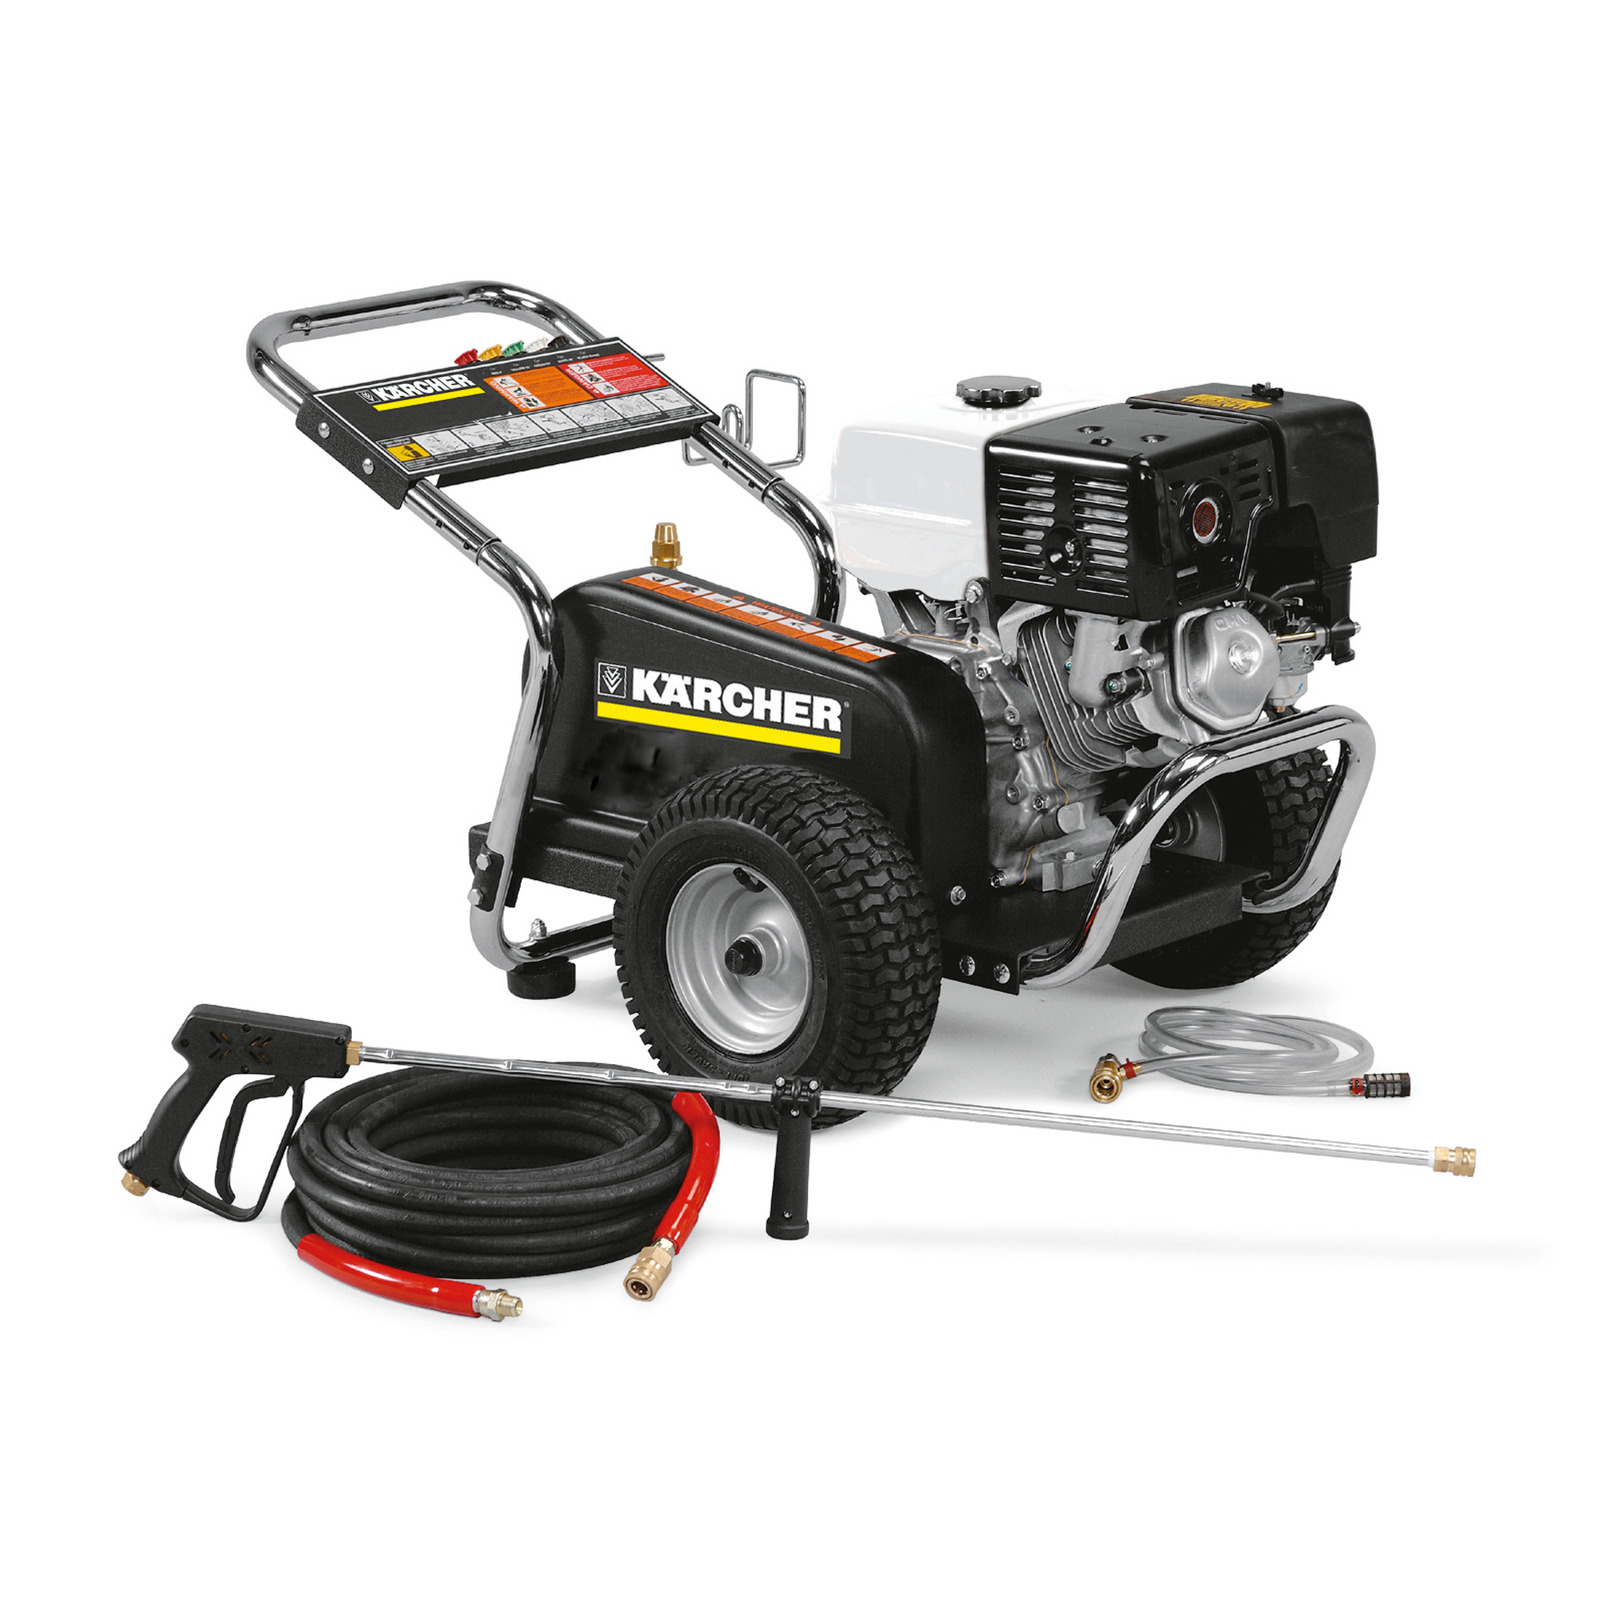 Karcher HD 1.575-152.0 Cart Honda Gasoline Cold Pressure Washer 3.0Gpm 3000Psi Freight Included Professional Series